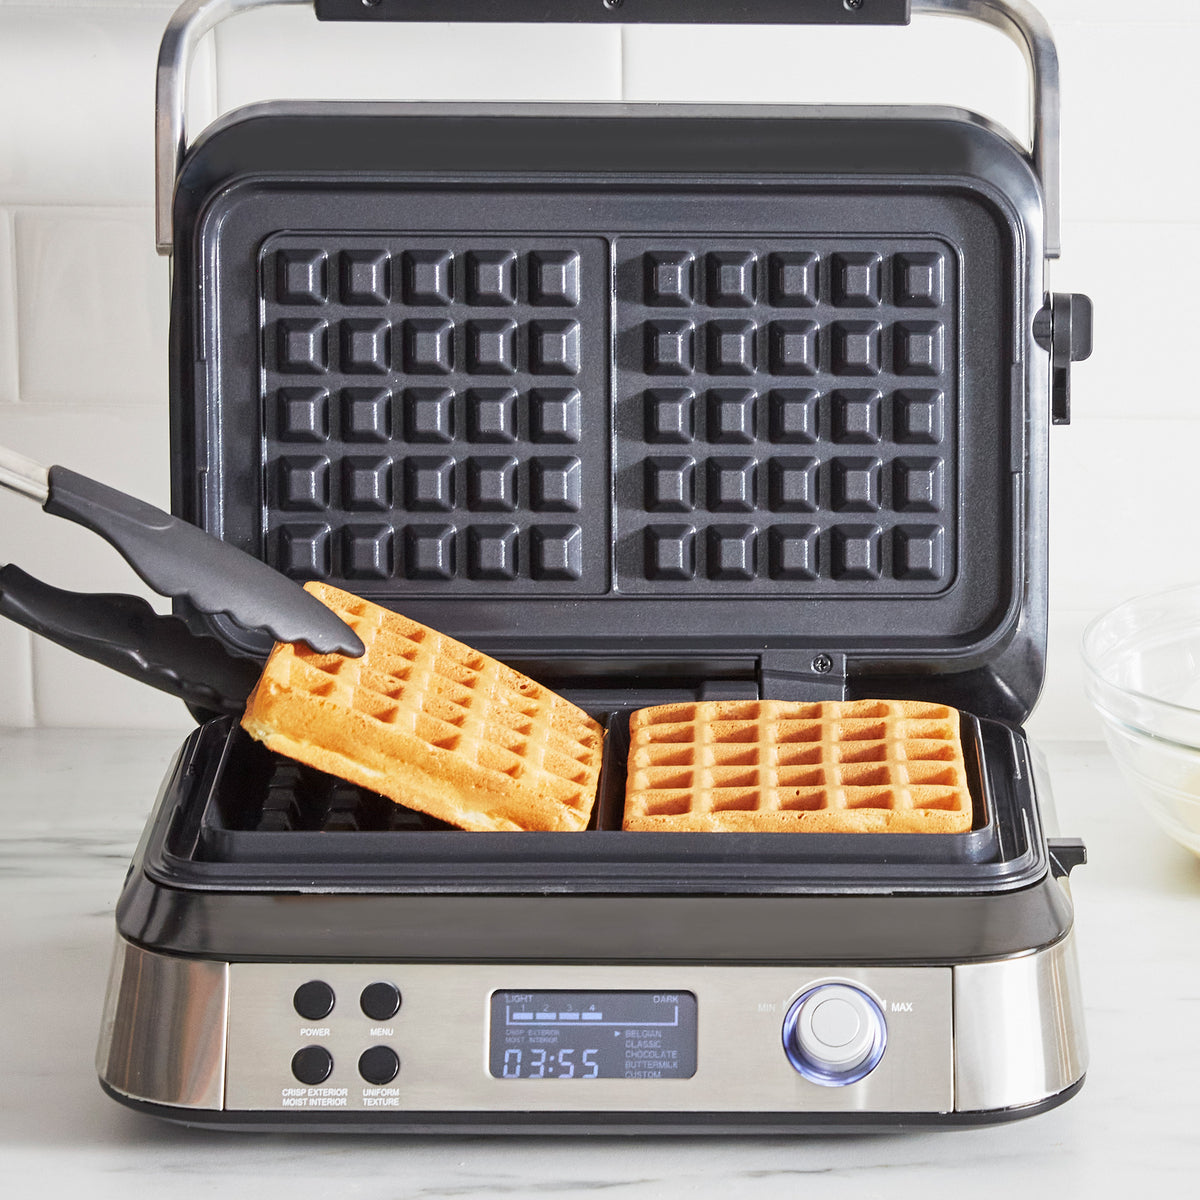 Greeze Double Belgian Waffle Maker, 1400W Newest Stainless Steel Waffle Iron 180° Flip, 8 Slices, Rotating & Nonstick Plates with Locking Buckle 